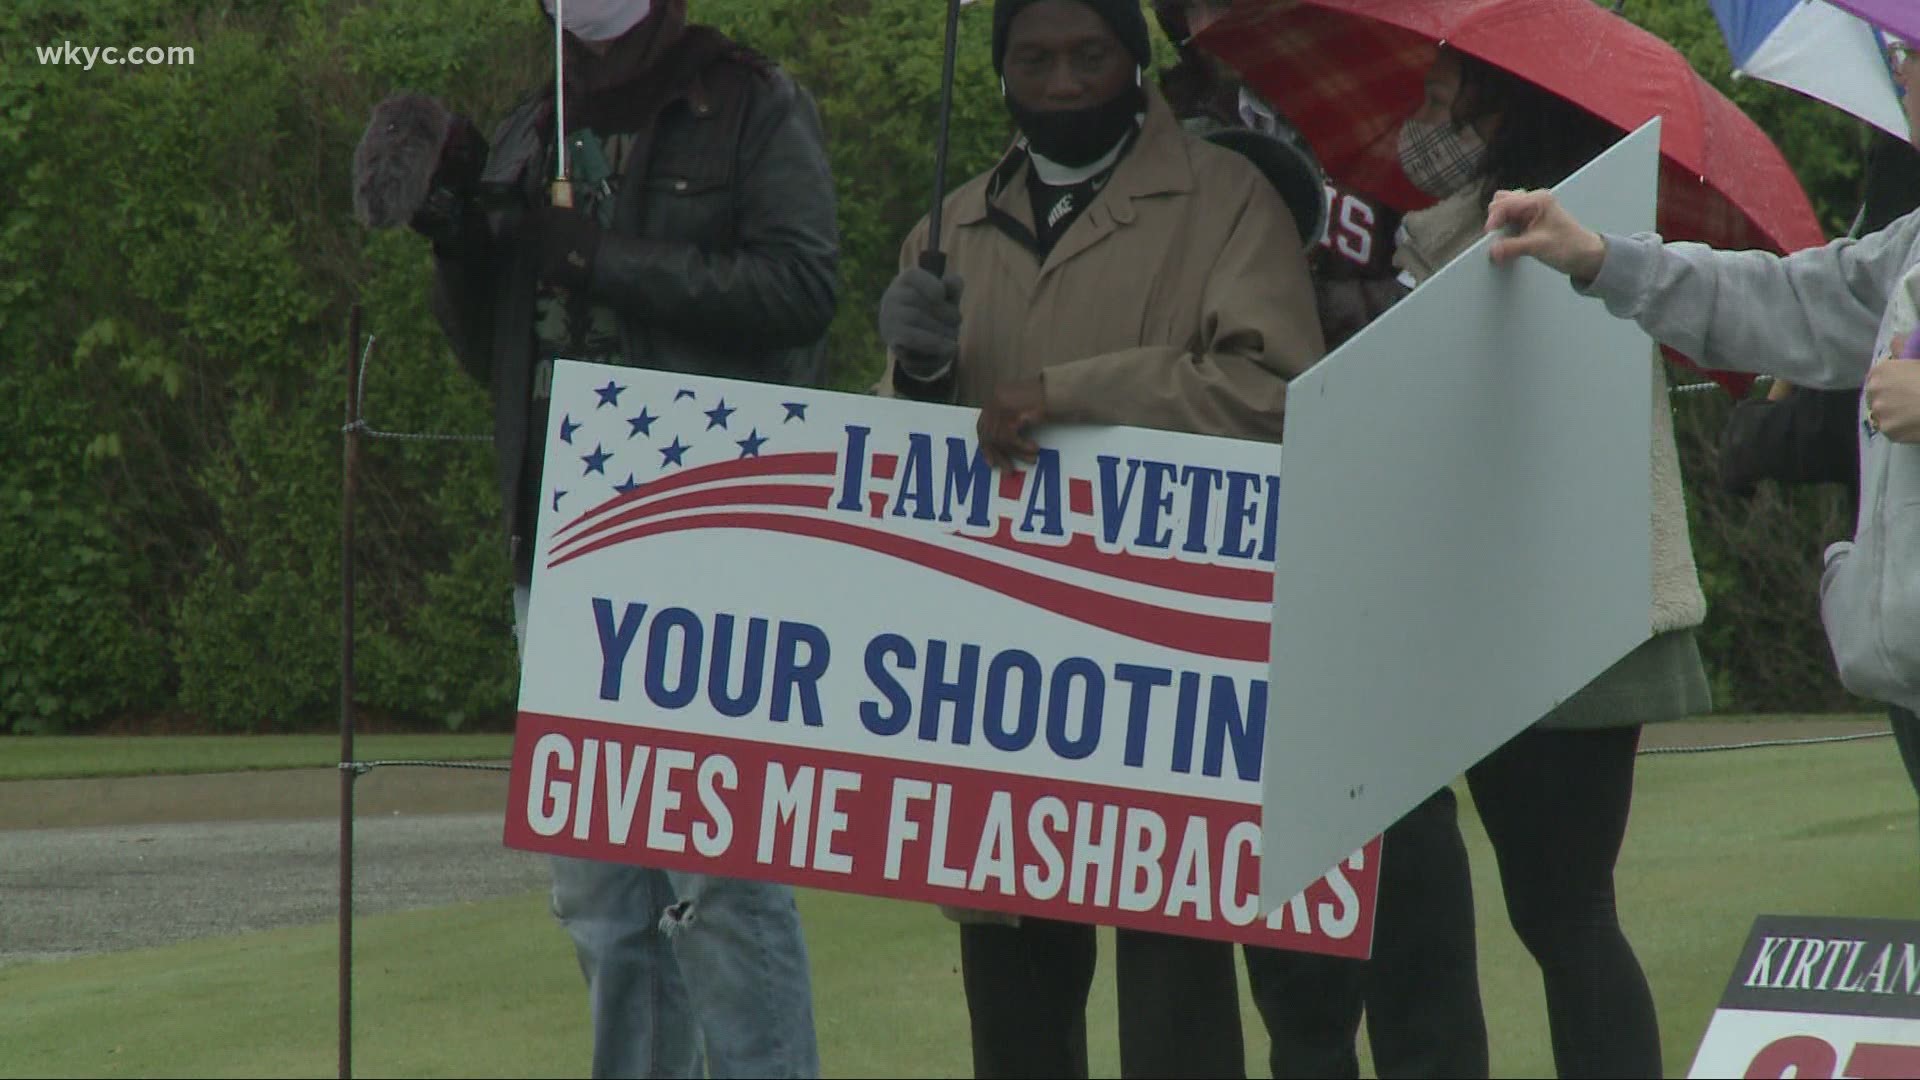 Protesters say that the skeet shooting is dangerous and hurtful. The Kirtland Country Club says it's well within its rights to allow the shooting to continue.